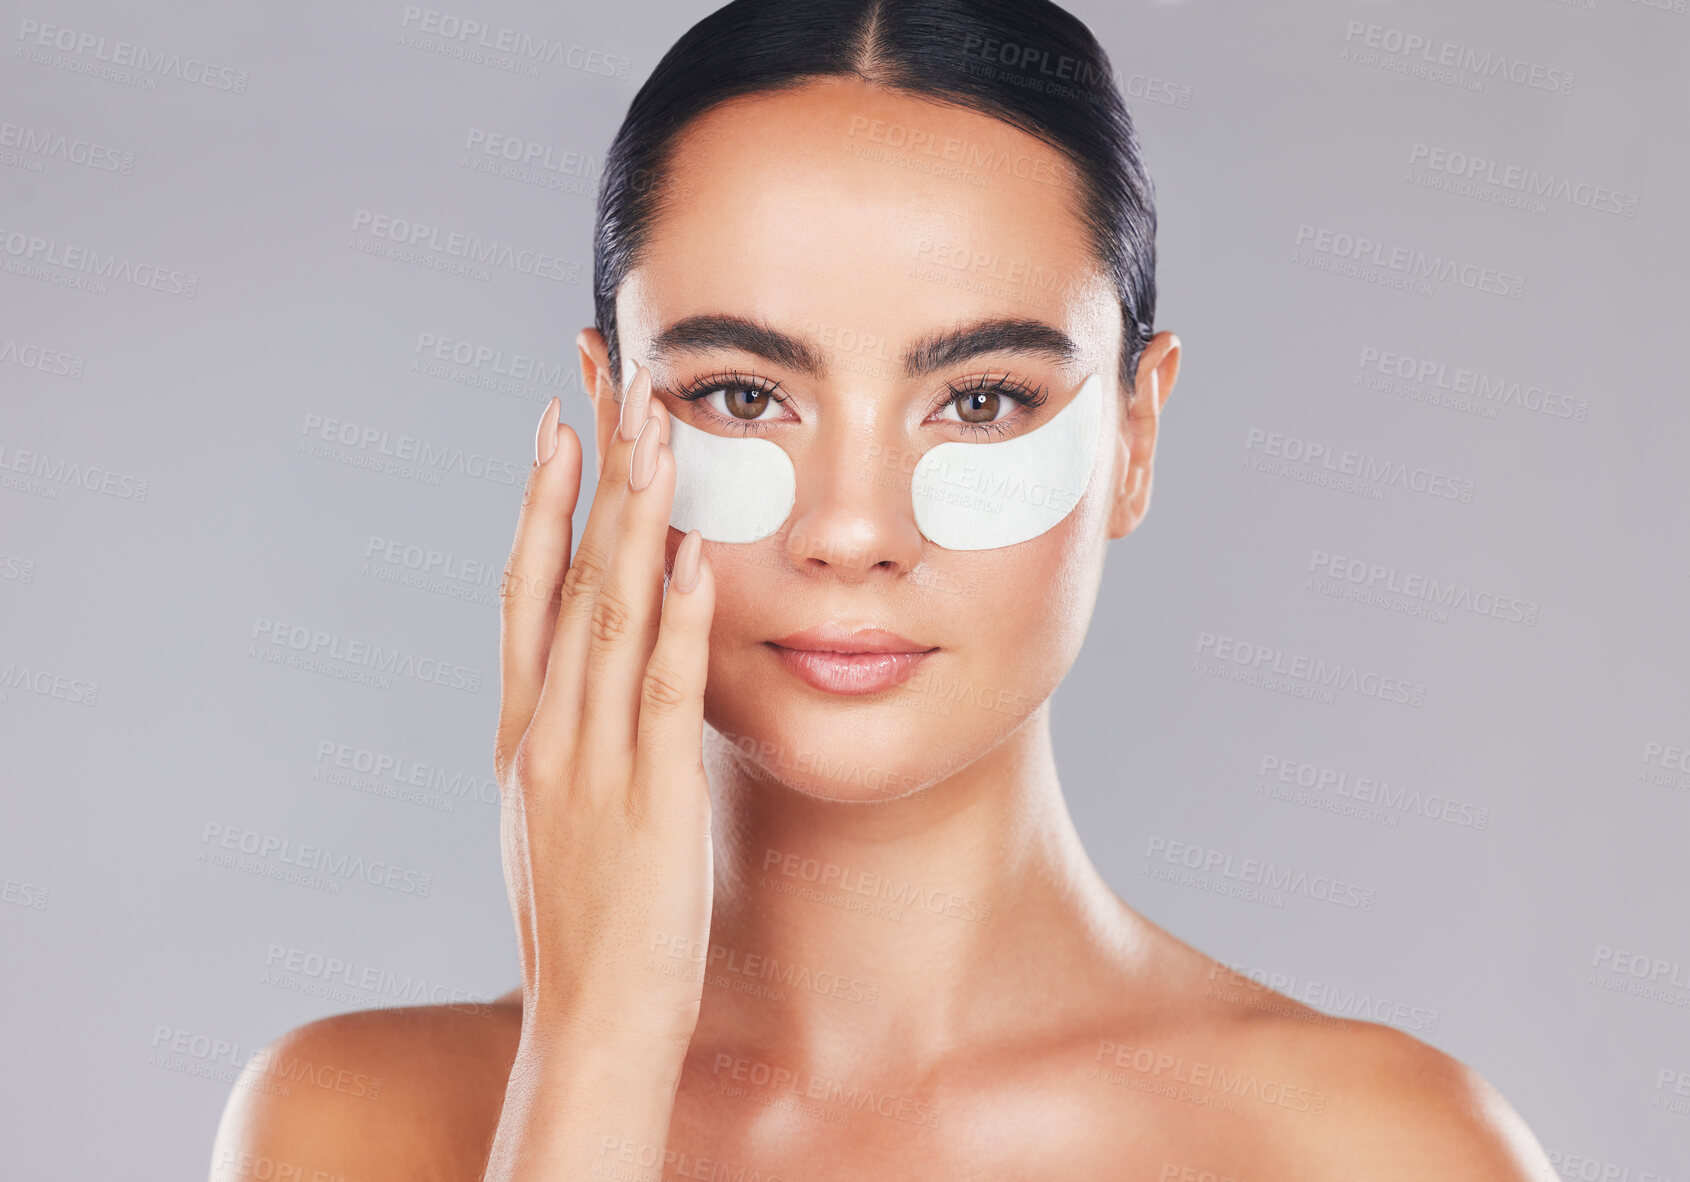 Buy stock photo Skincare, face and woman with eye patches on a gray studio background. Health, beauty or female model from Spain with facial product, cosmetics pads or collagen eye mask for hydration or anti aging

